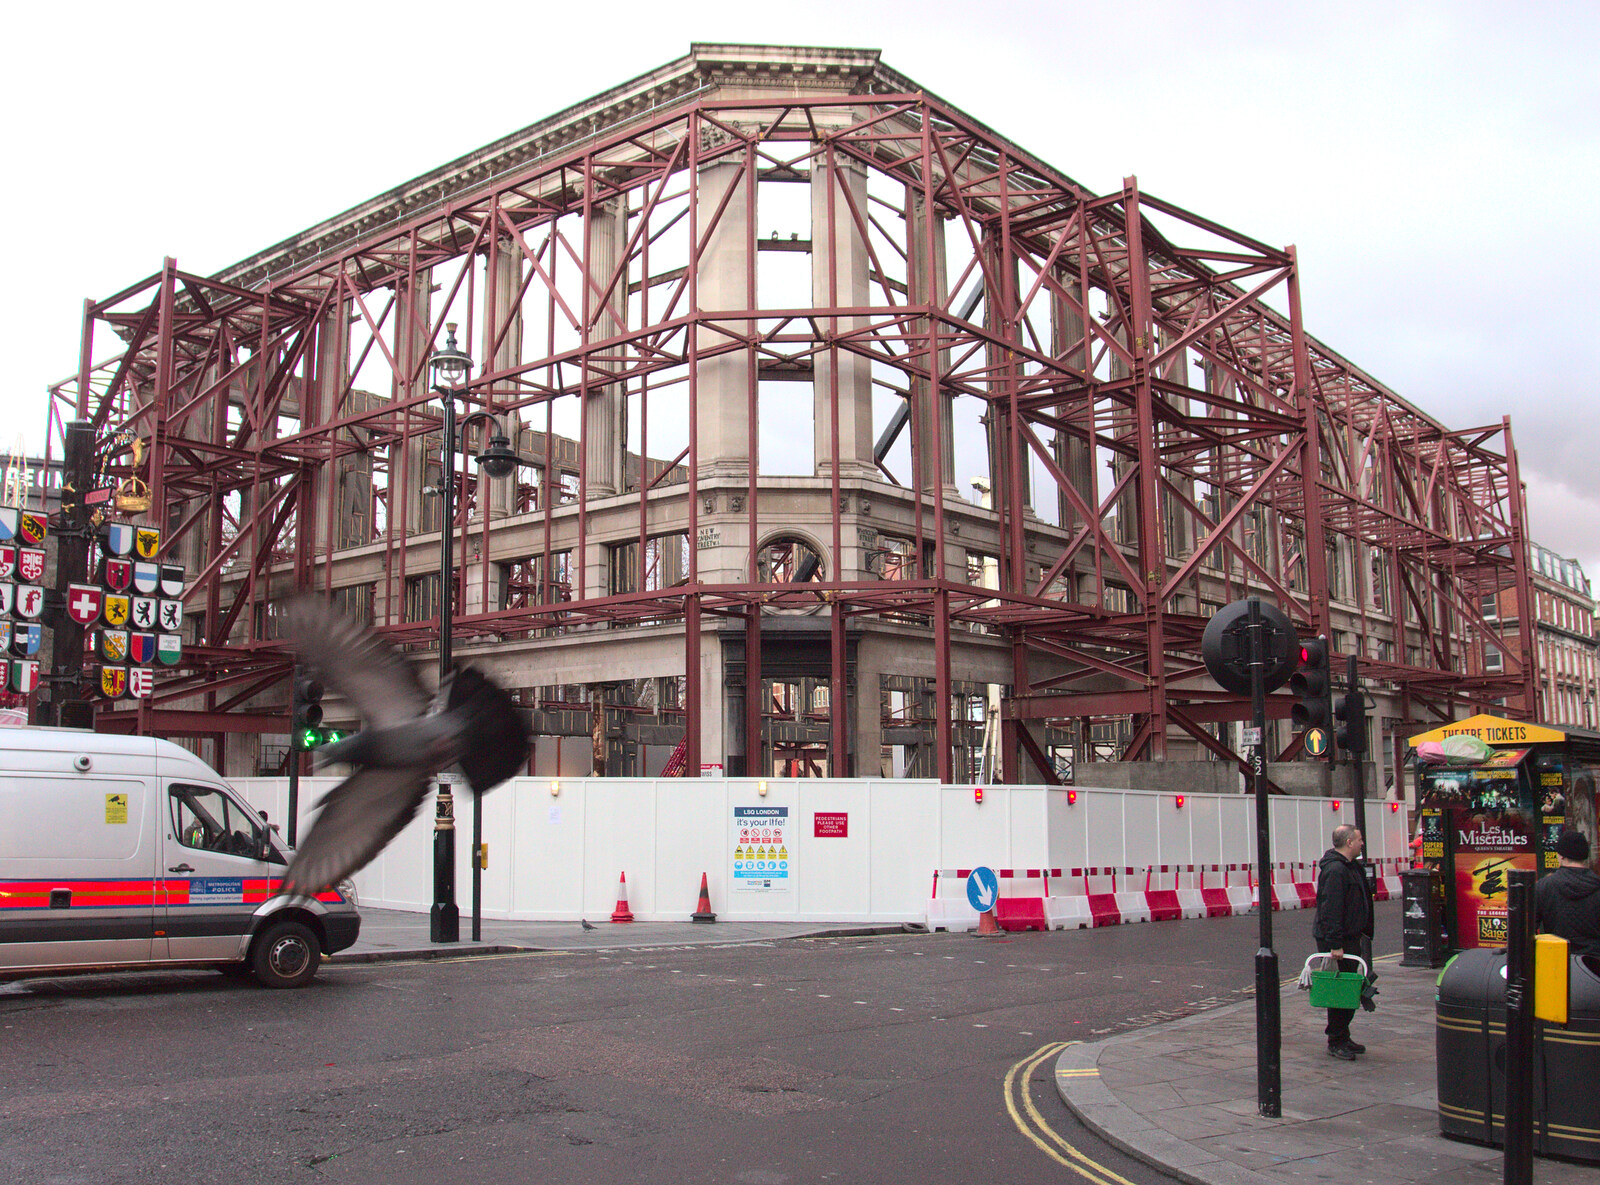 An old building is gutted in Leicester Square from SwiftKey Innovation Nights, Westminster, London - 19th December 2014